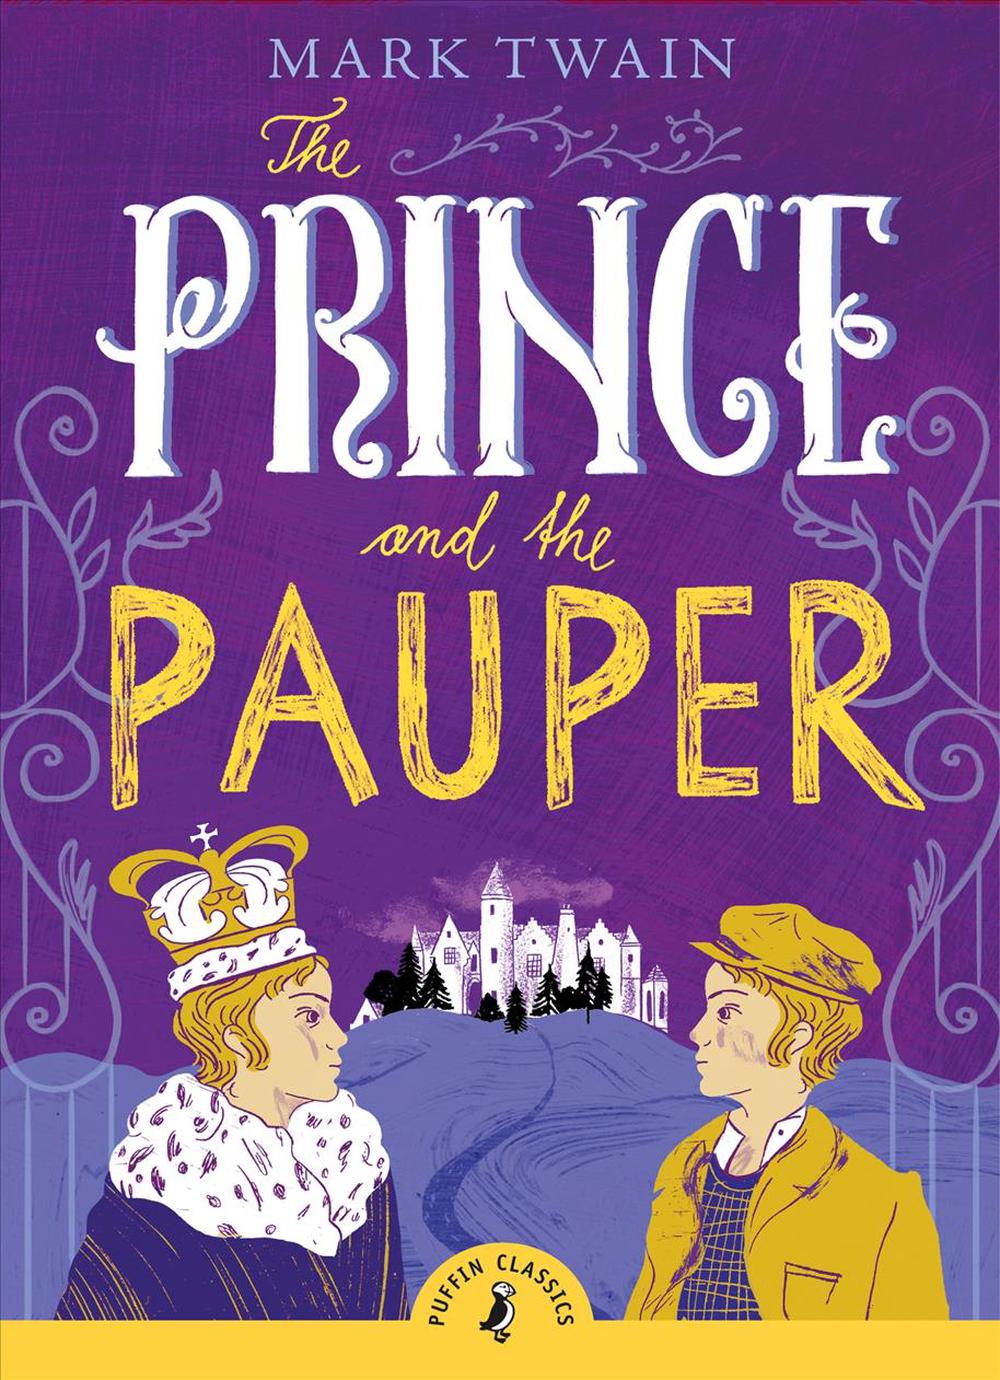 book prince and the pauper